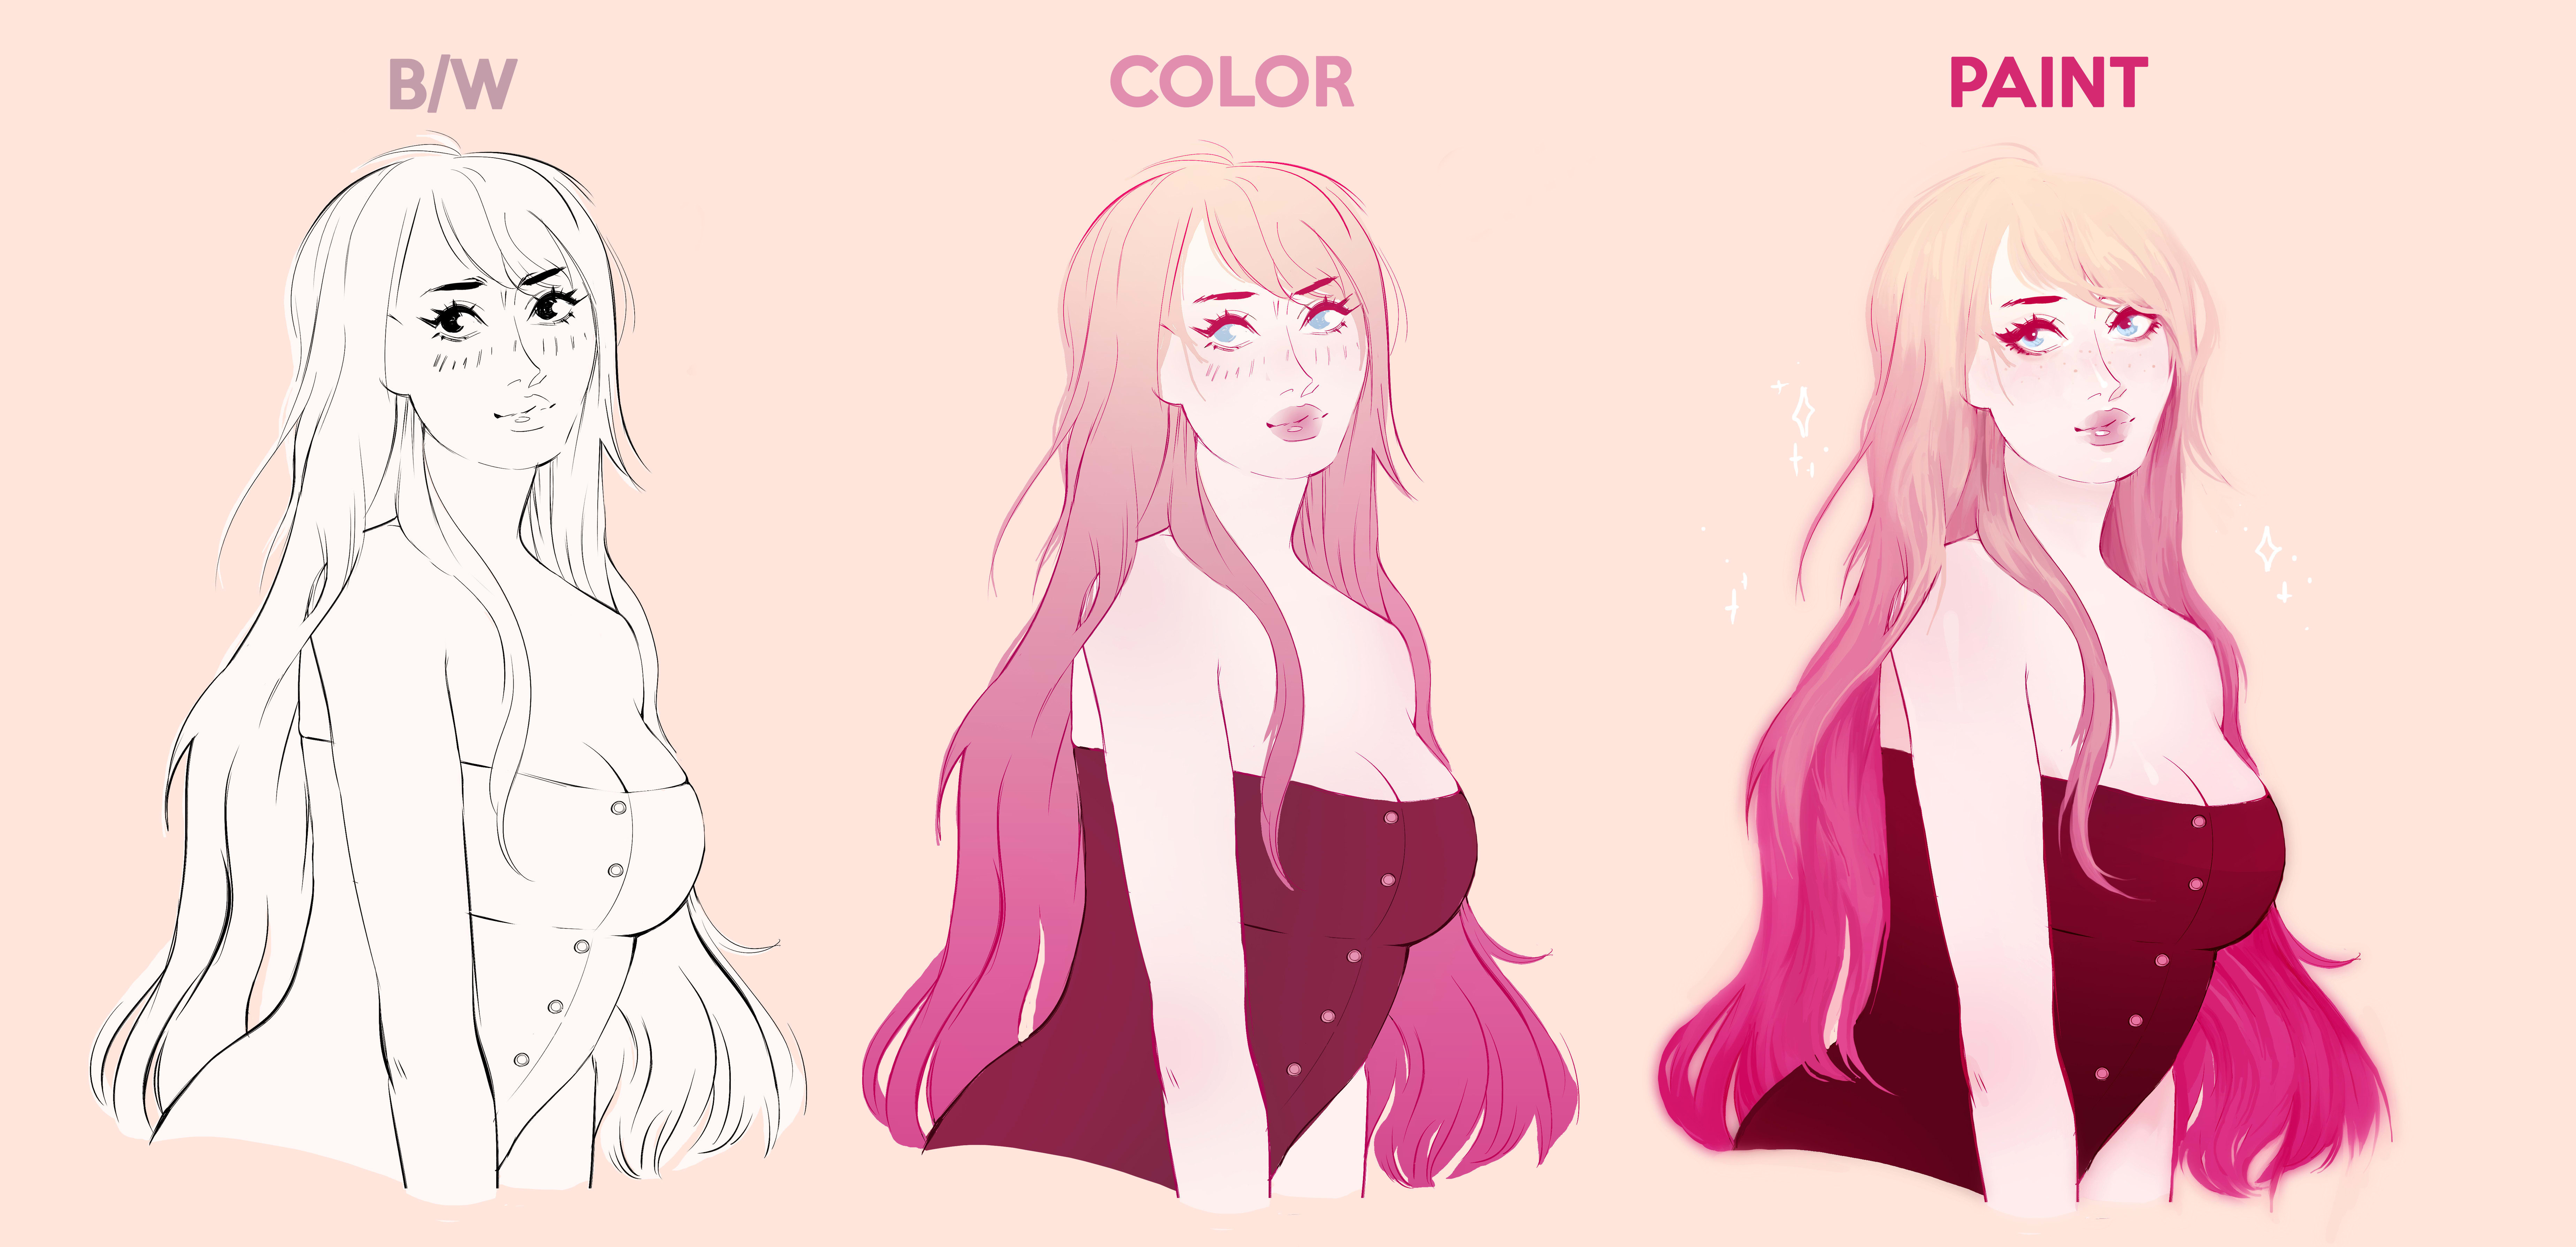 Draw people in an anime style by Onigirls | Fiverr